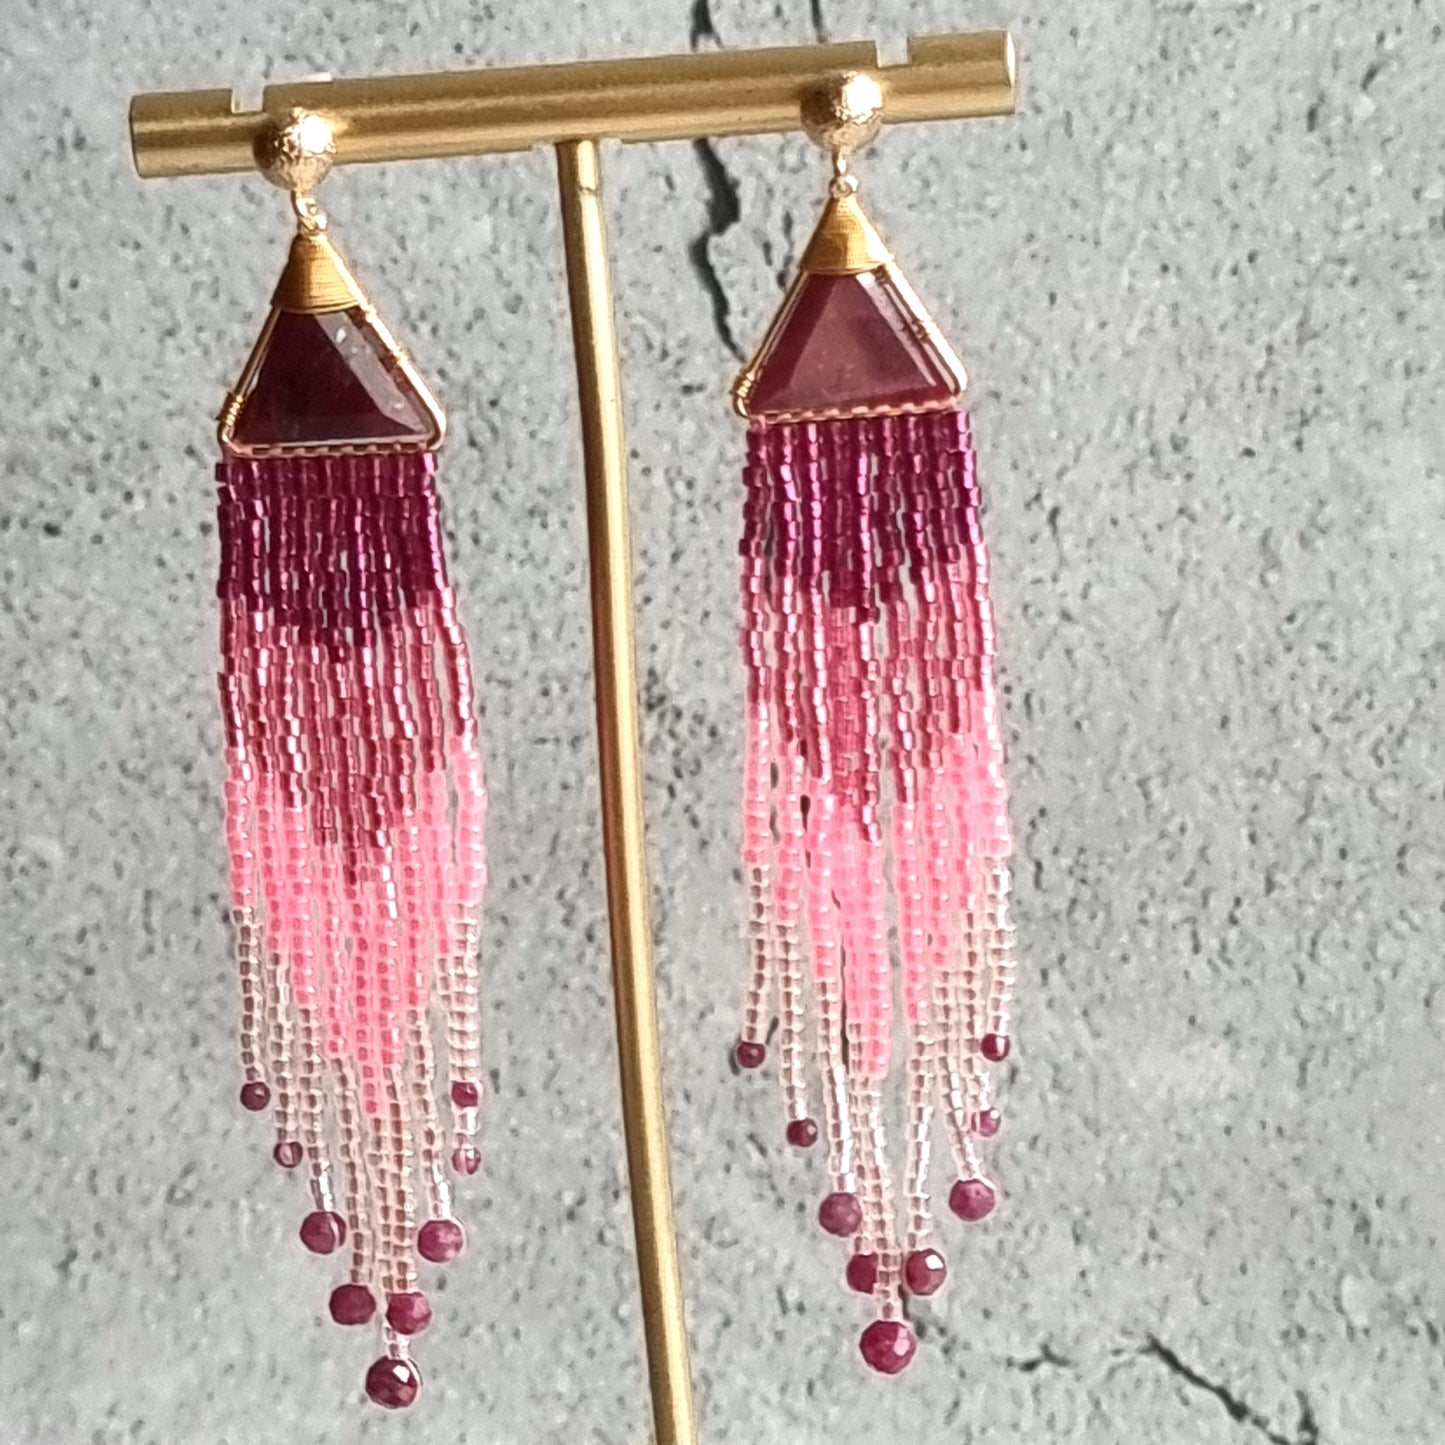 Mozambique Ruby Triangle Gemstone with Ombre Fringe Earrings